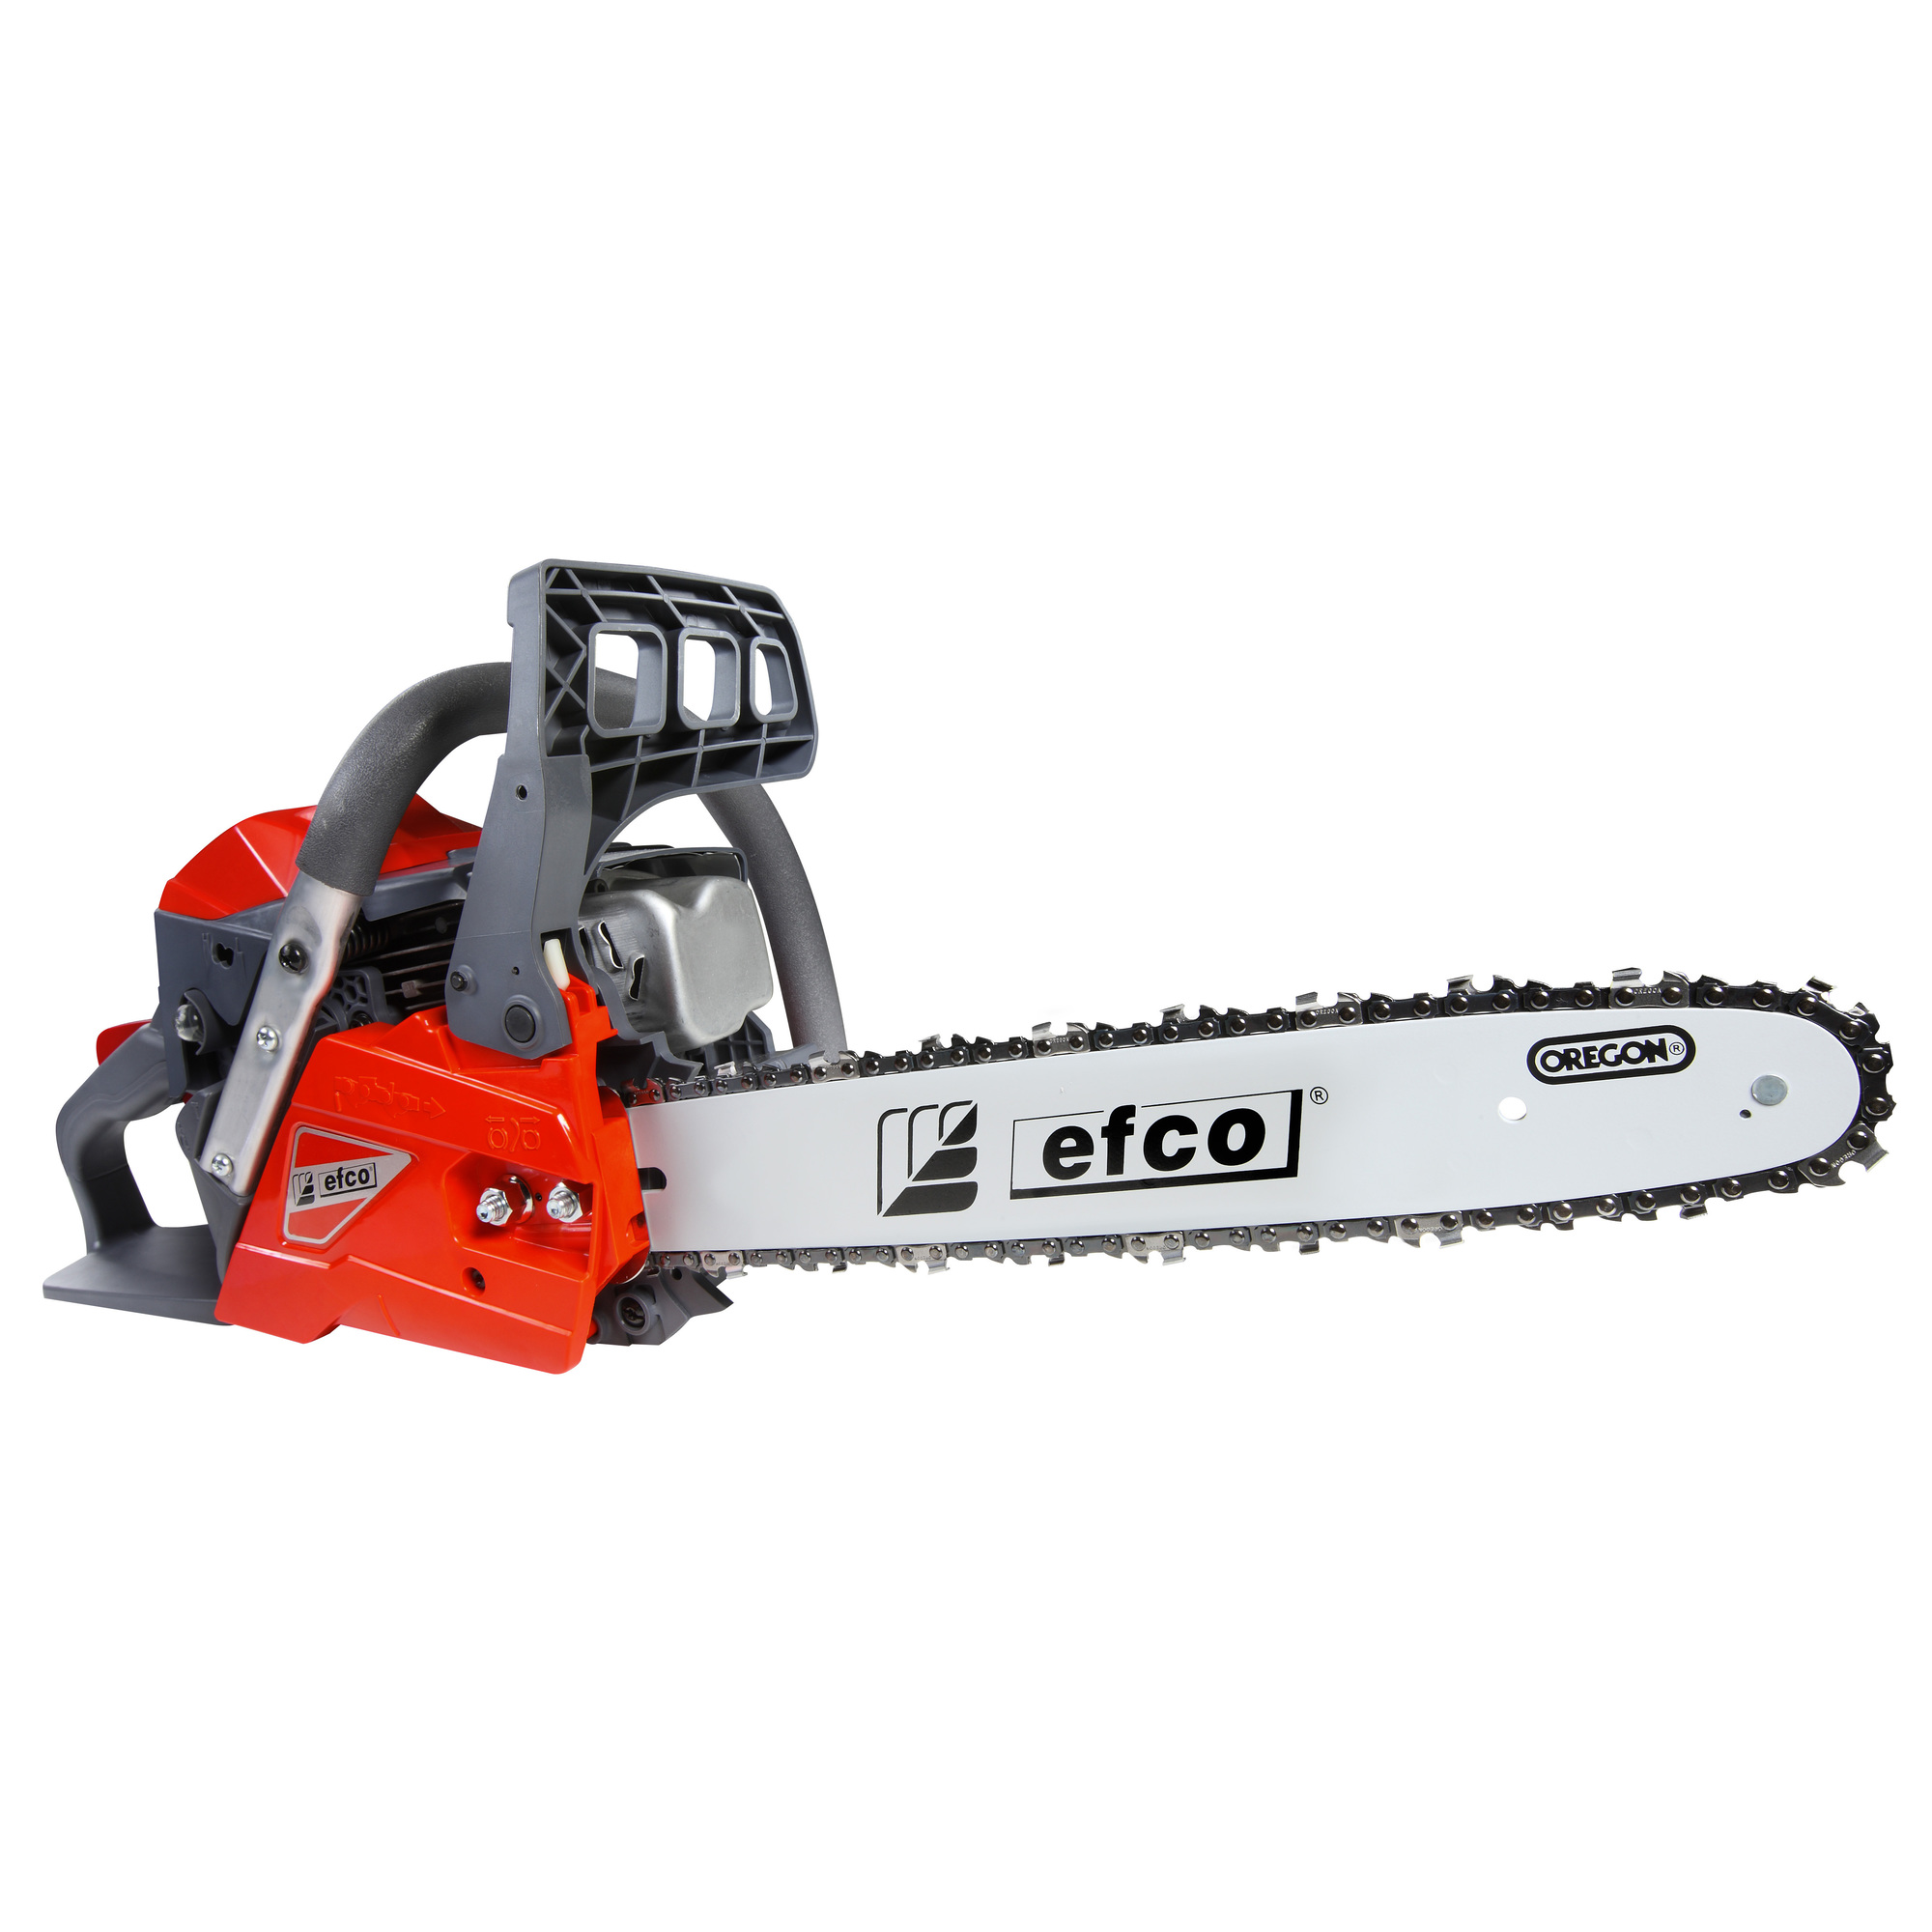 Efco, H-Series Compact Gas Chainsaw, Bar Length 16 in, Engine Displacement 38.9 cc, Model MTH4000-16